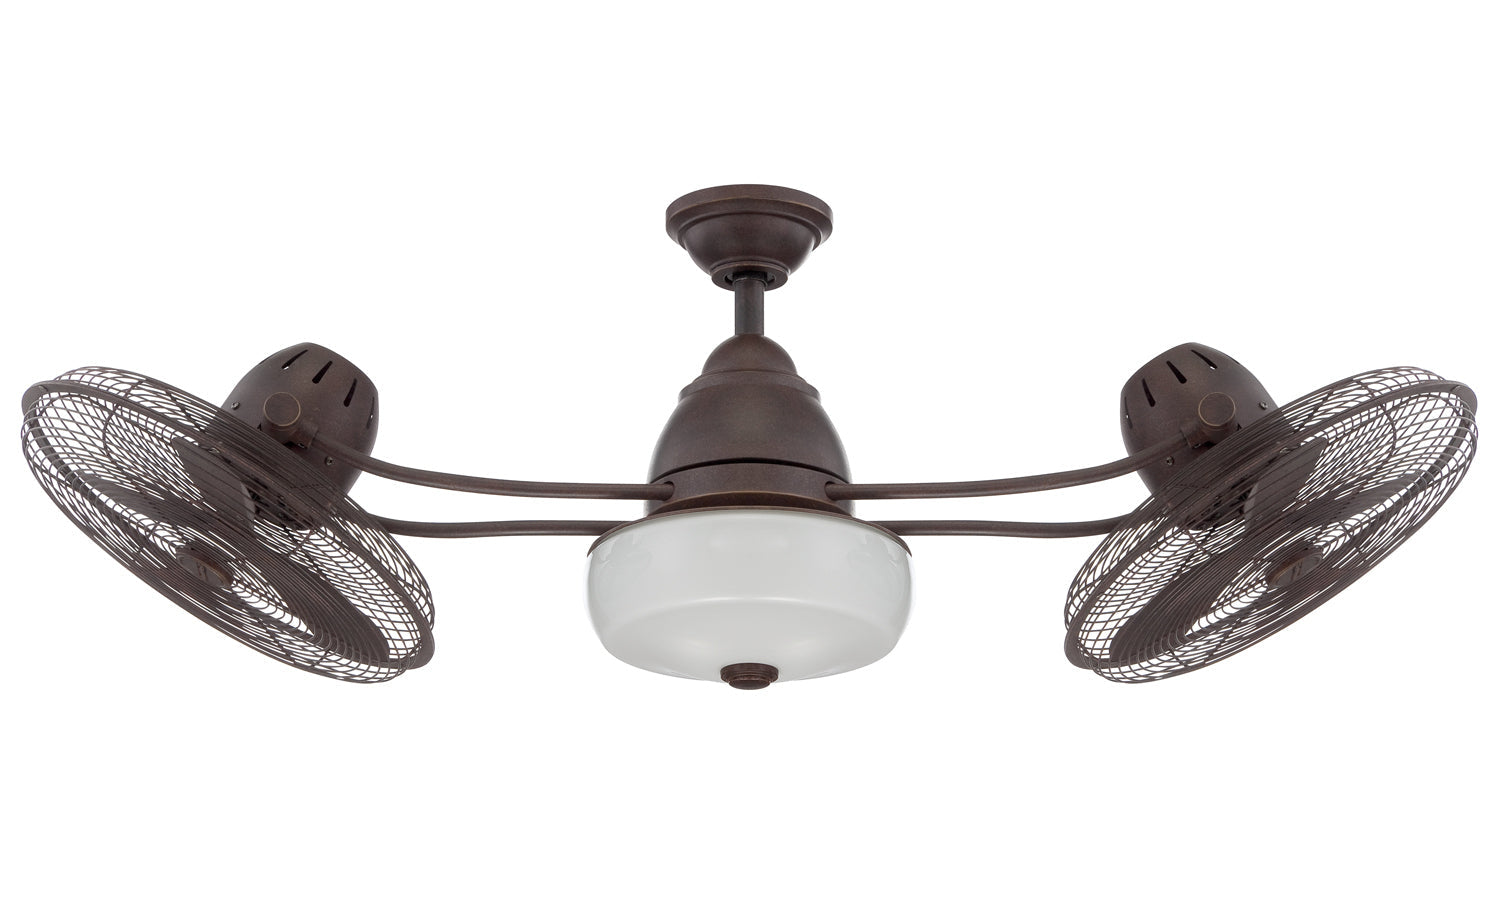 Craftmade Bellows II Indoor/Outdoor BW248AG6 Ceiling Fan 48 - Aged Bronze Textured, Aged Bronze/Aged Bronze/